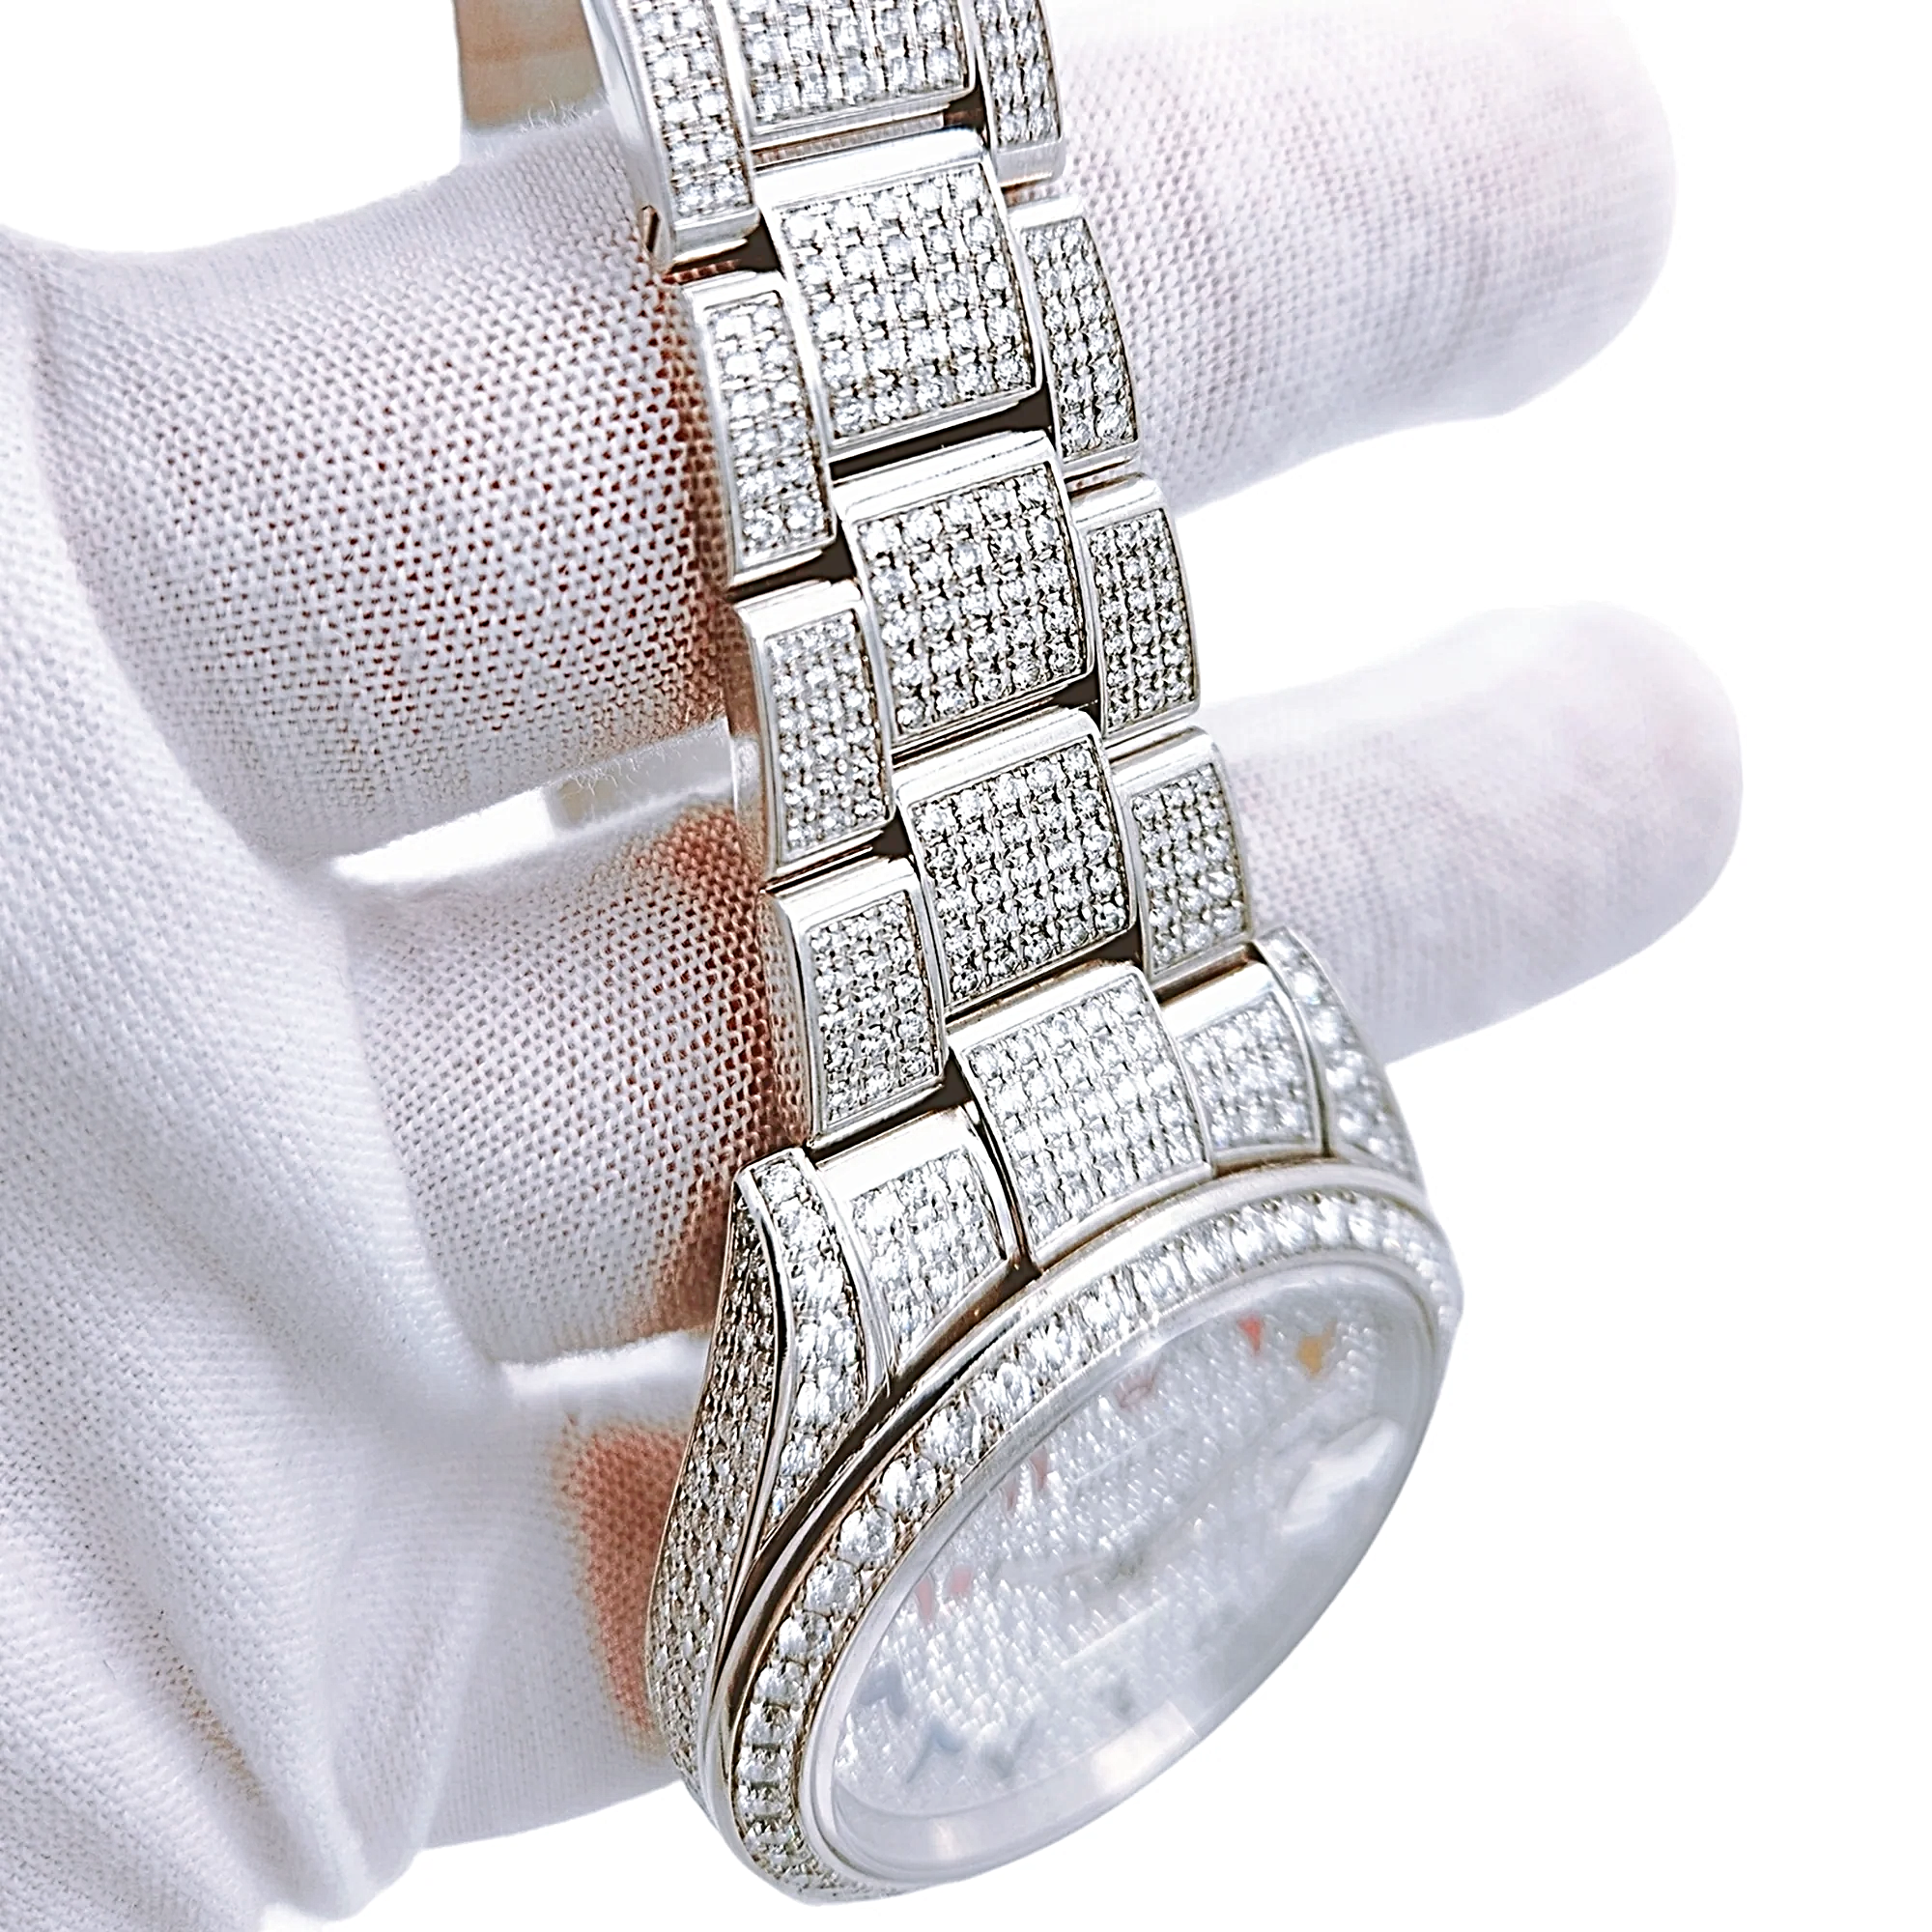 Men's Rolex 40mm DateJust Diamond Bracelet / Stainless Steel Watch with Diamond Dial and Diamond Bezel. (Pre-Owned)